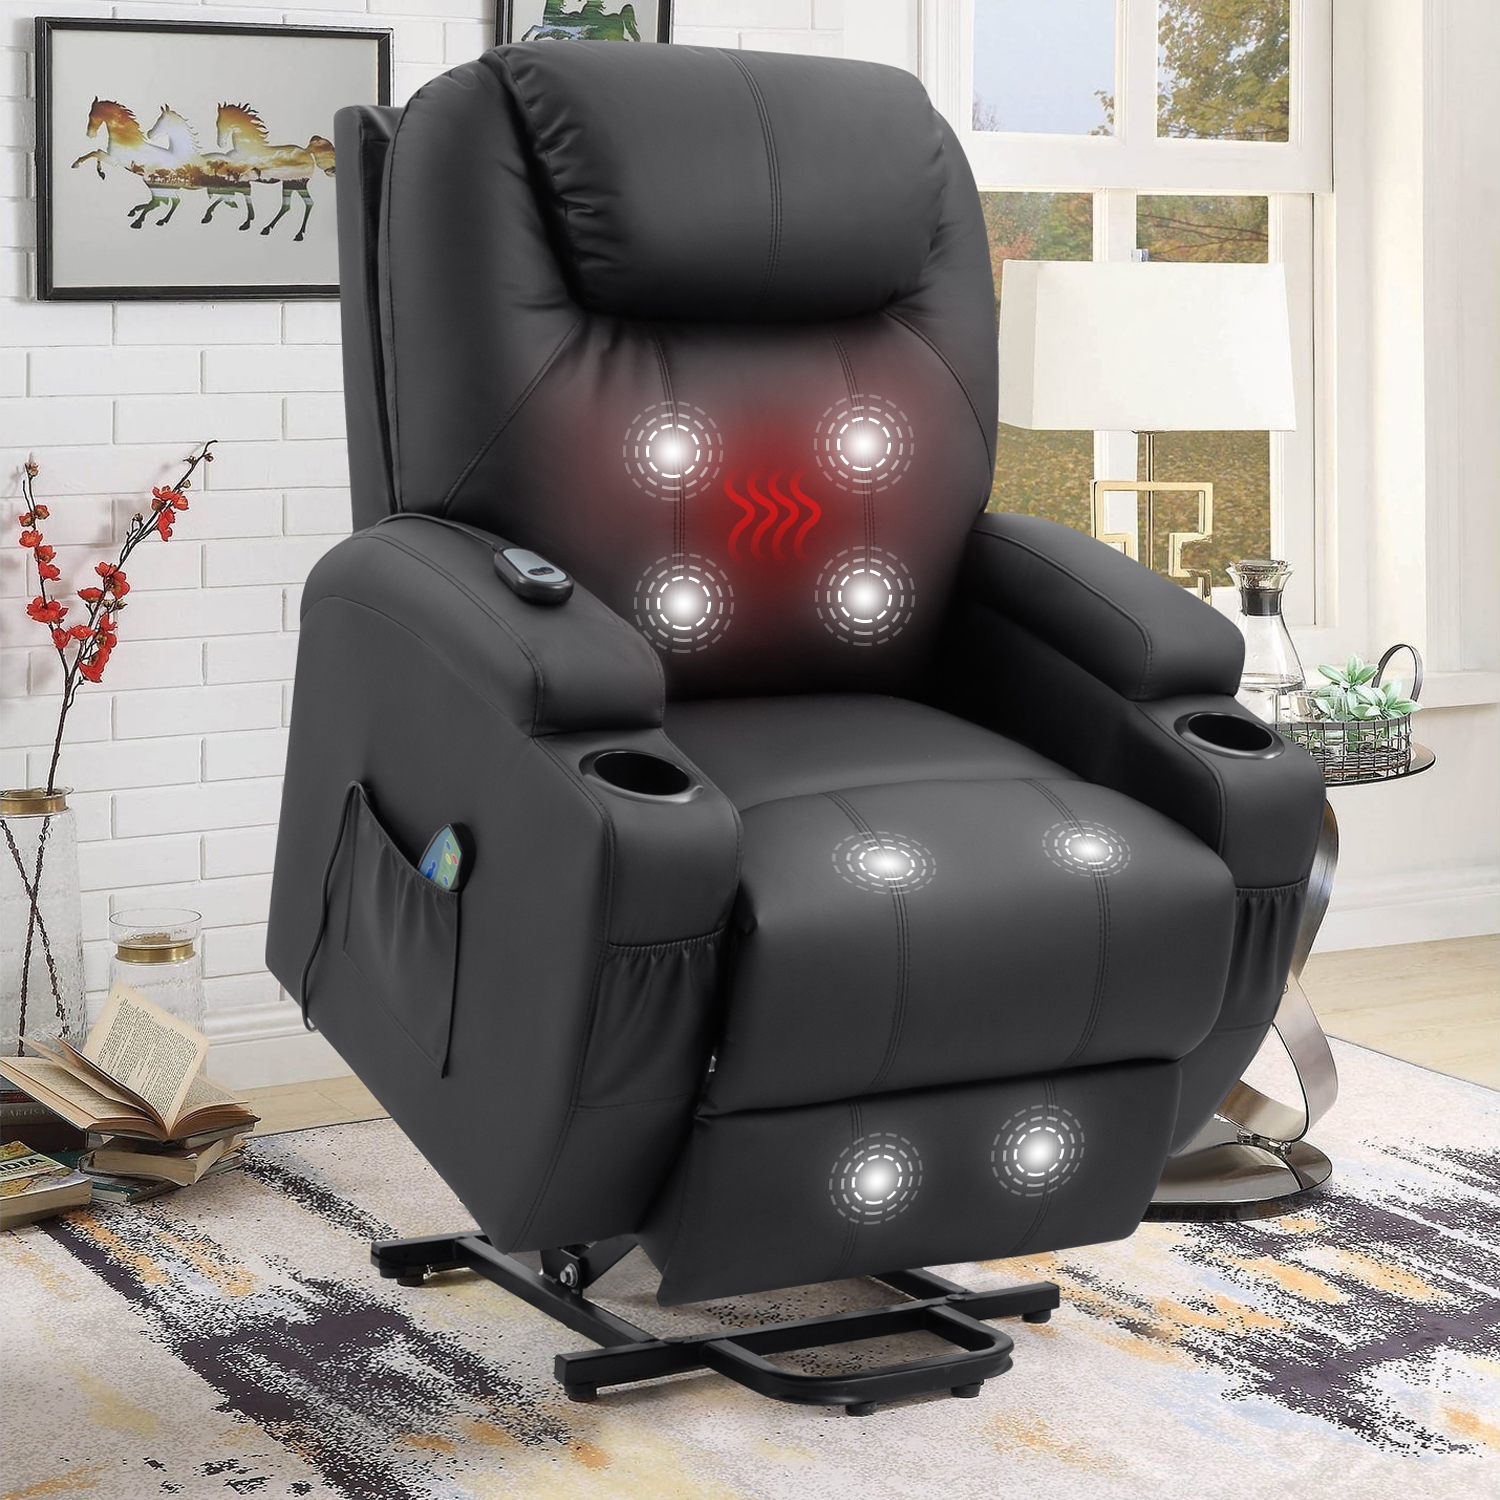 Lacoo Power Lift Recliner with Massage and Heat, Black Faux Leather - image 1 of 8